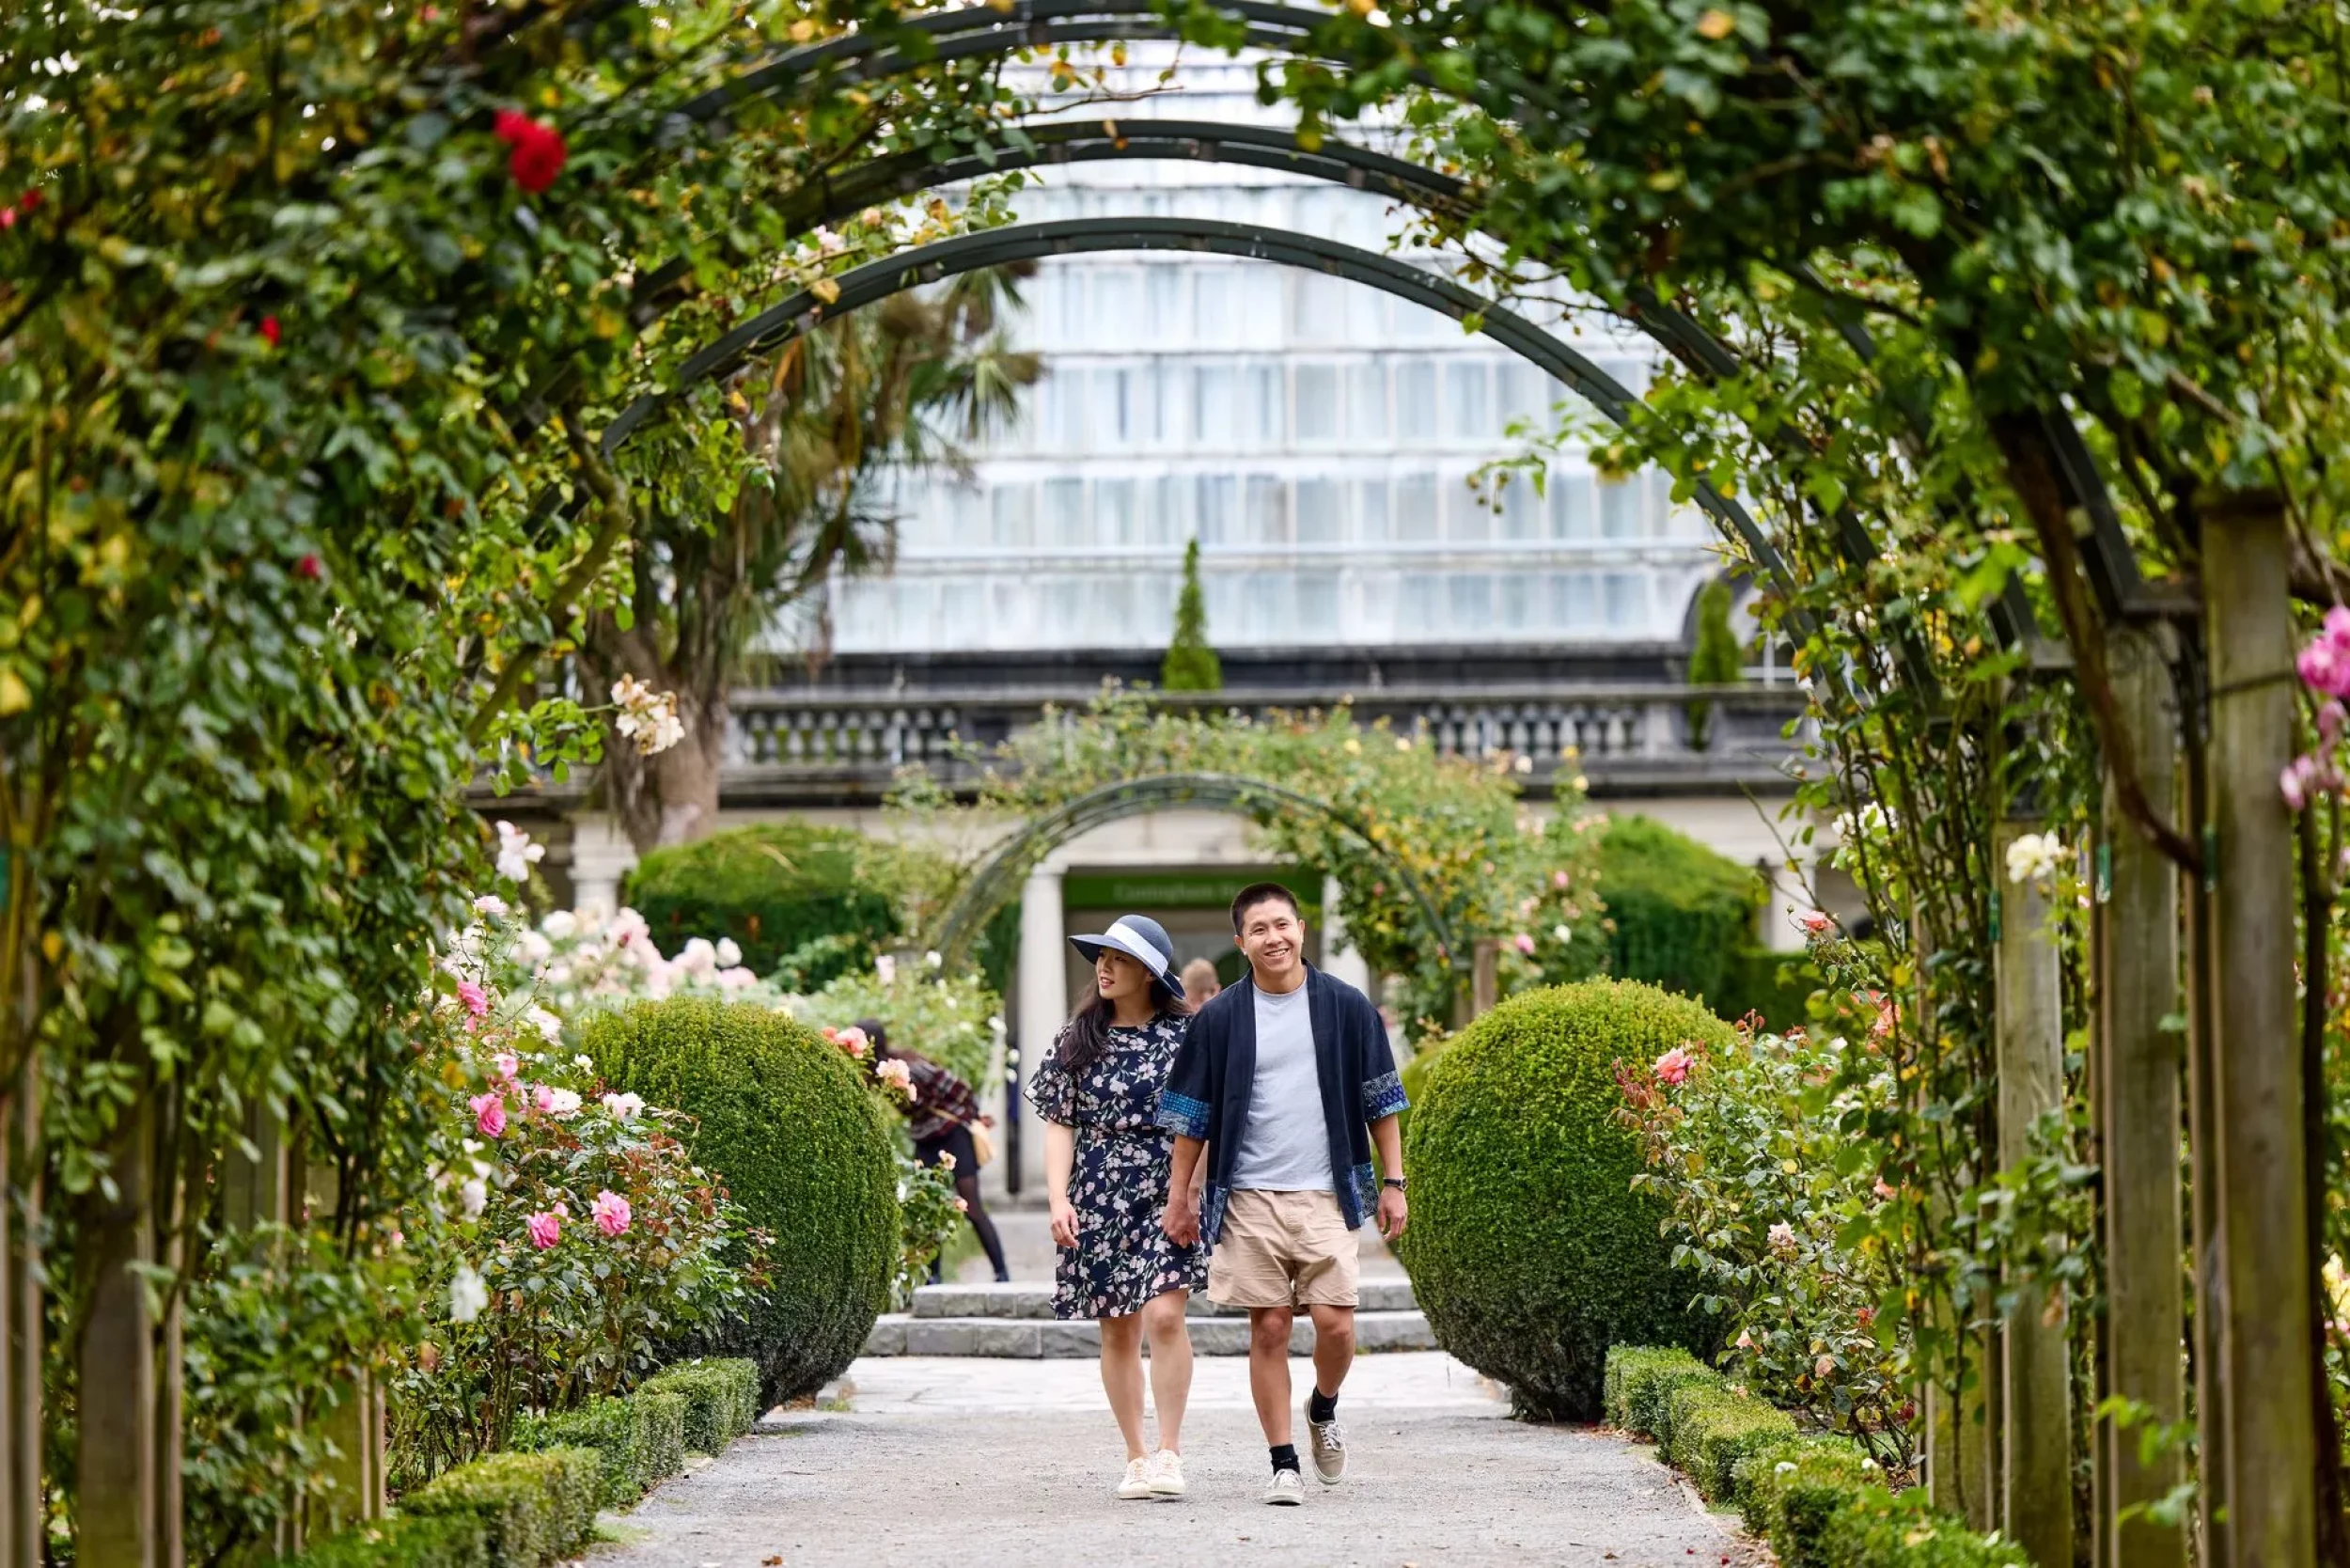 Couple enjoying the sceneries at the rose garden - Credit: ChristchurchNZ